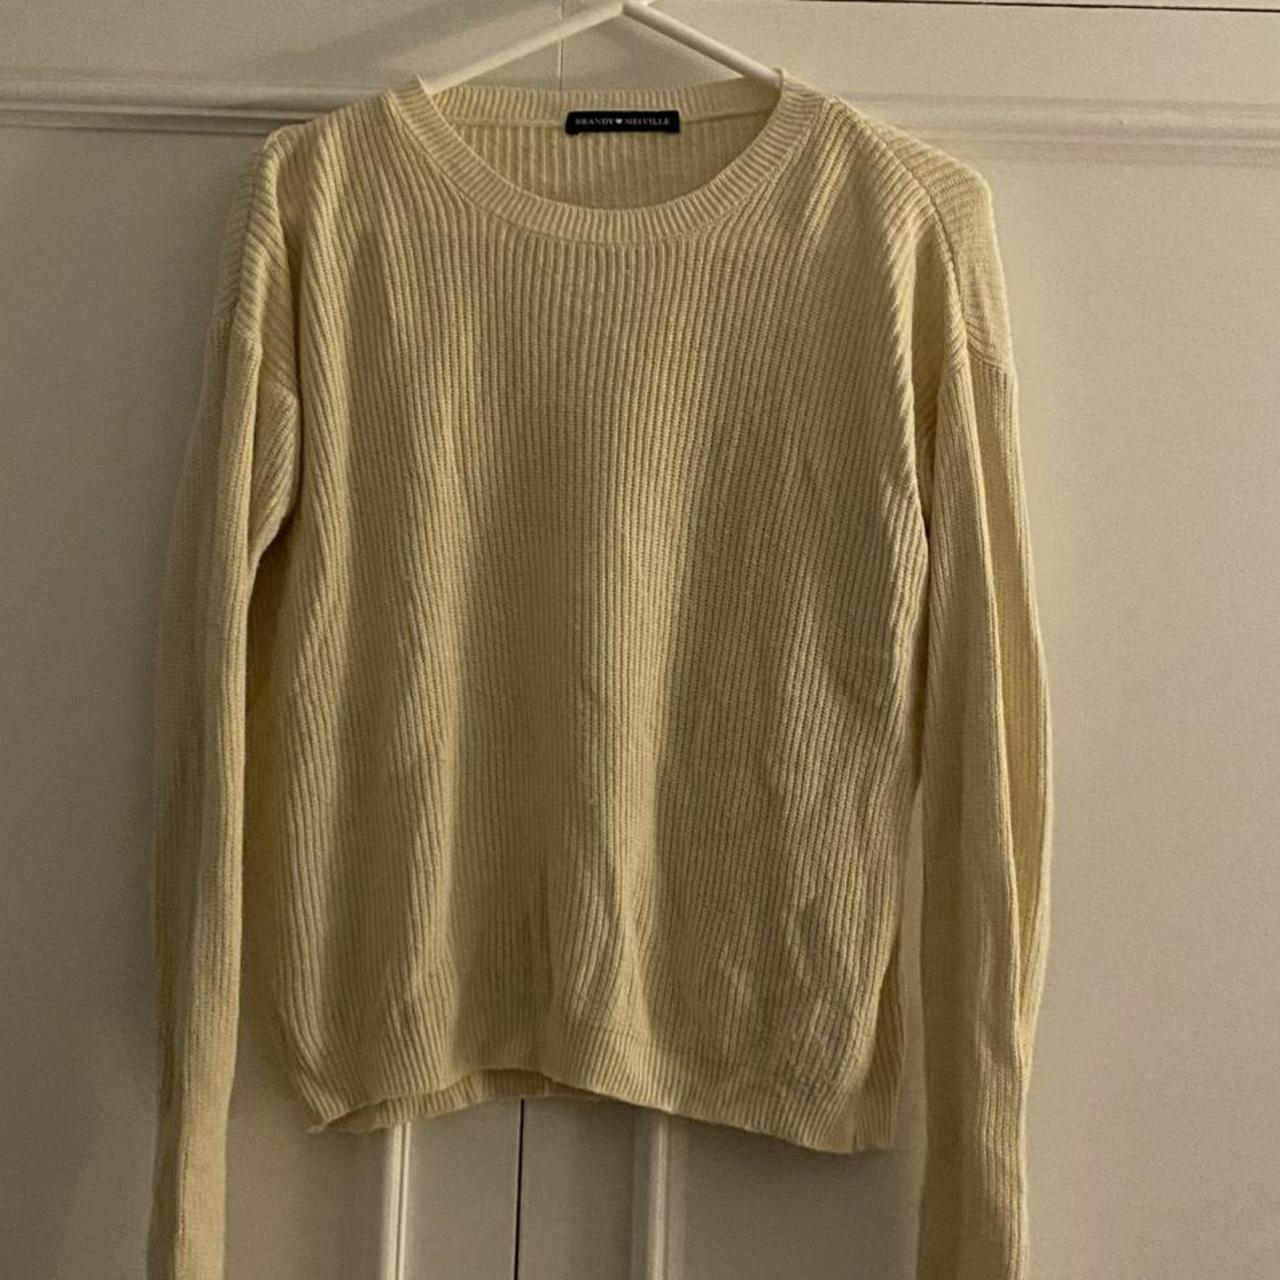 Pastel yellow brandy melville jumper. Very soft and... - Depop